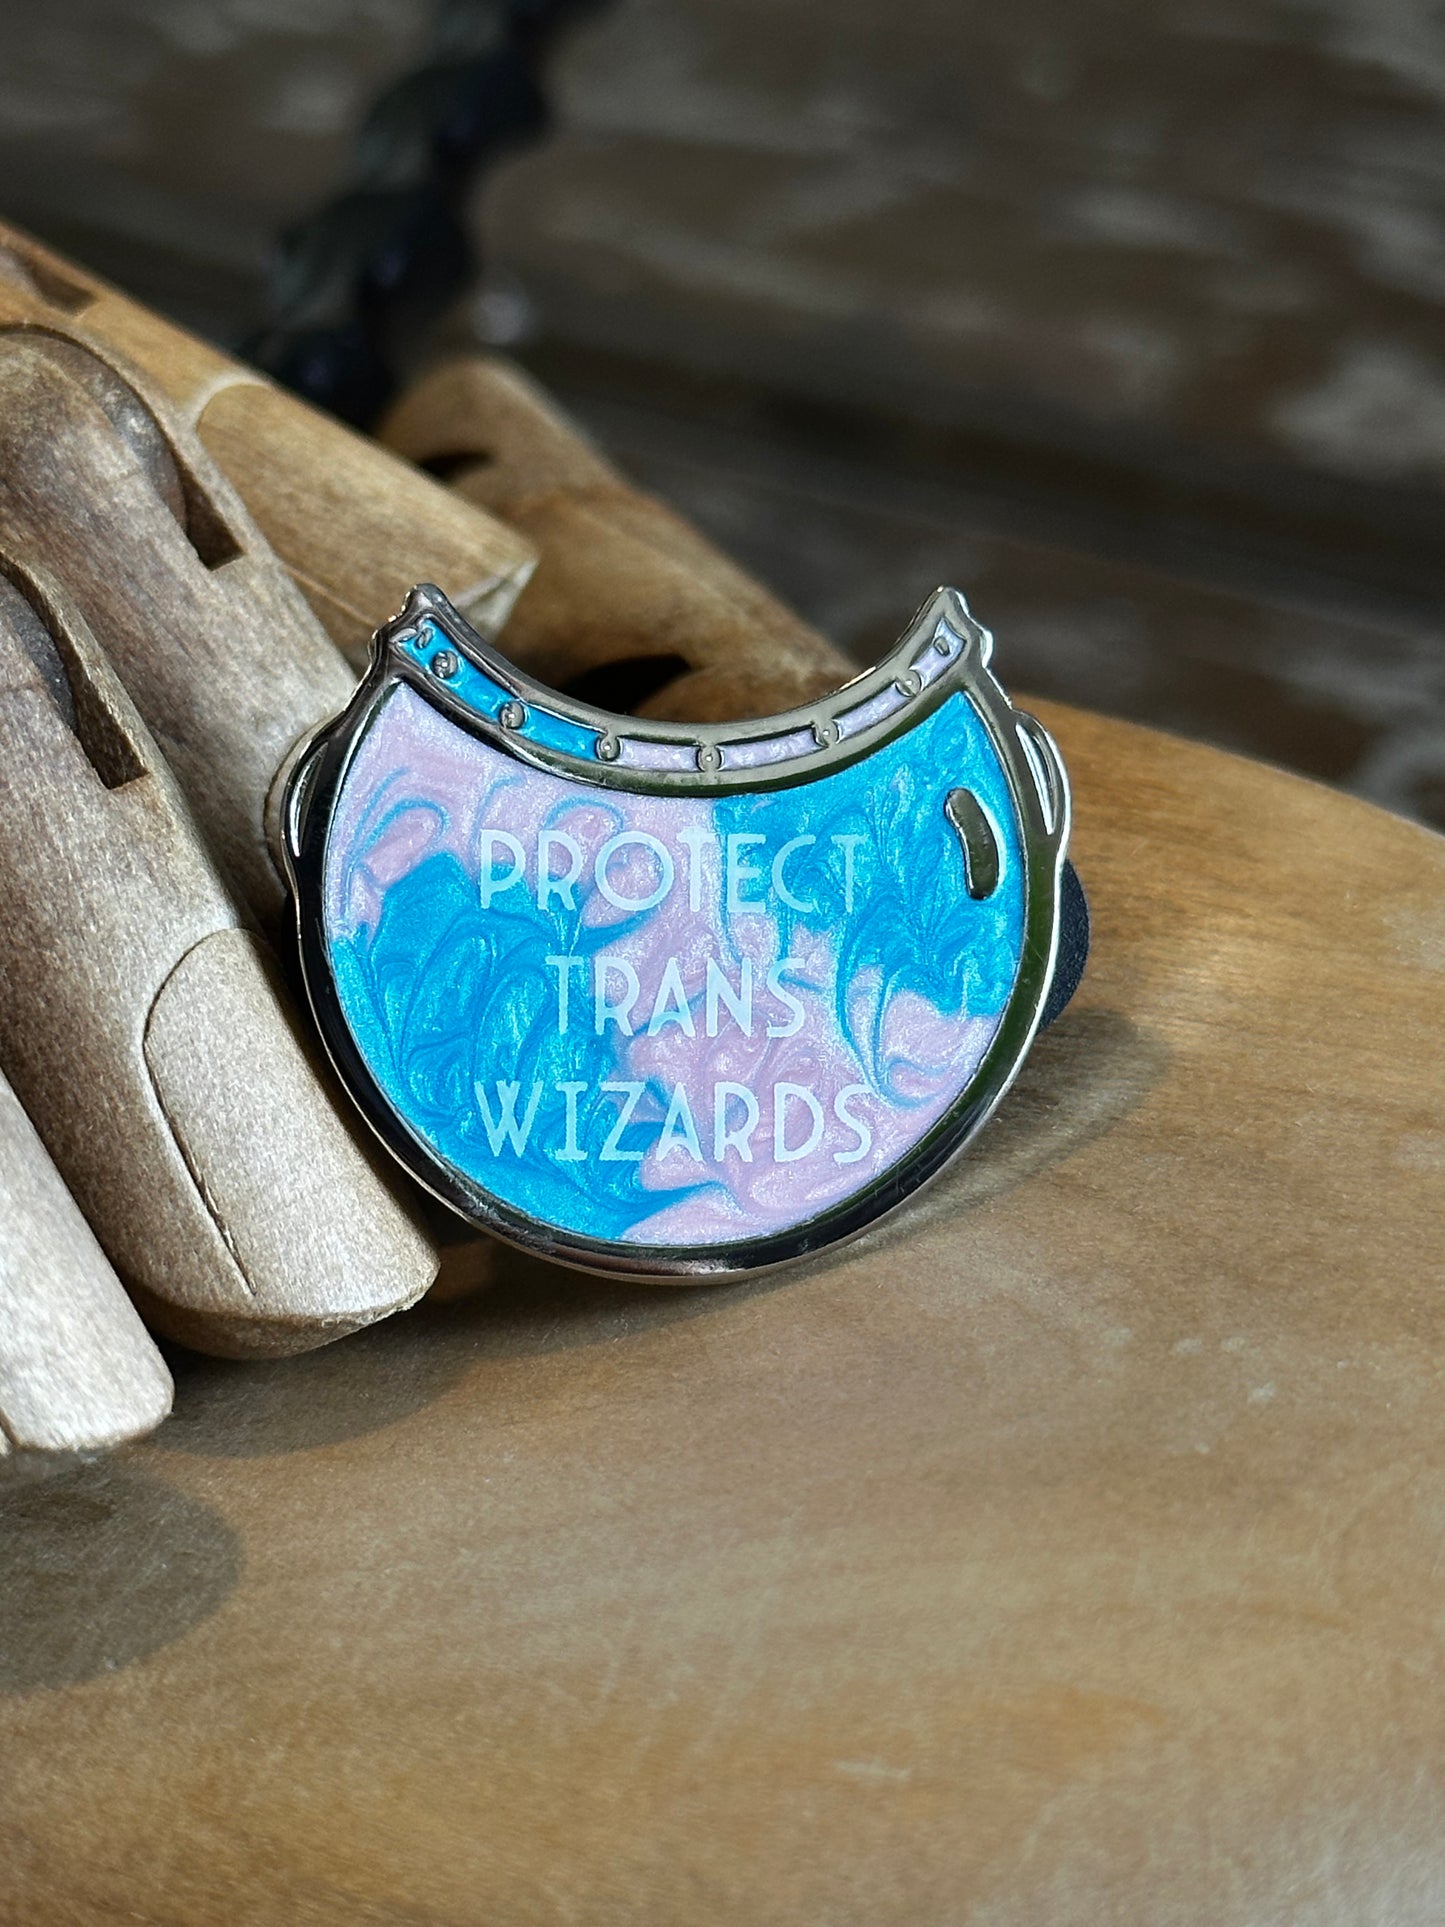 Protect Trans Witches/Wizards Cauldron Stack